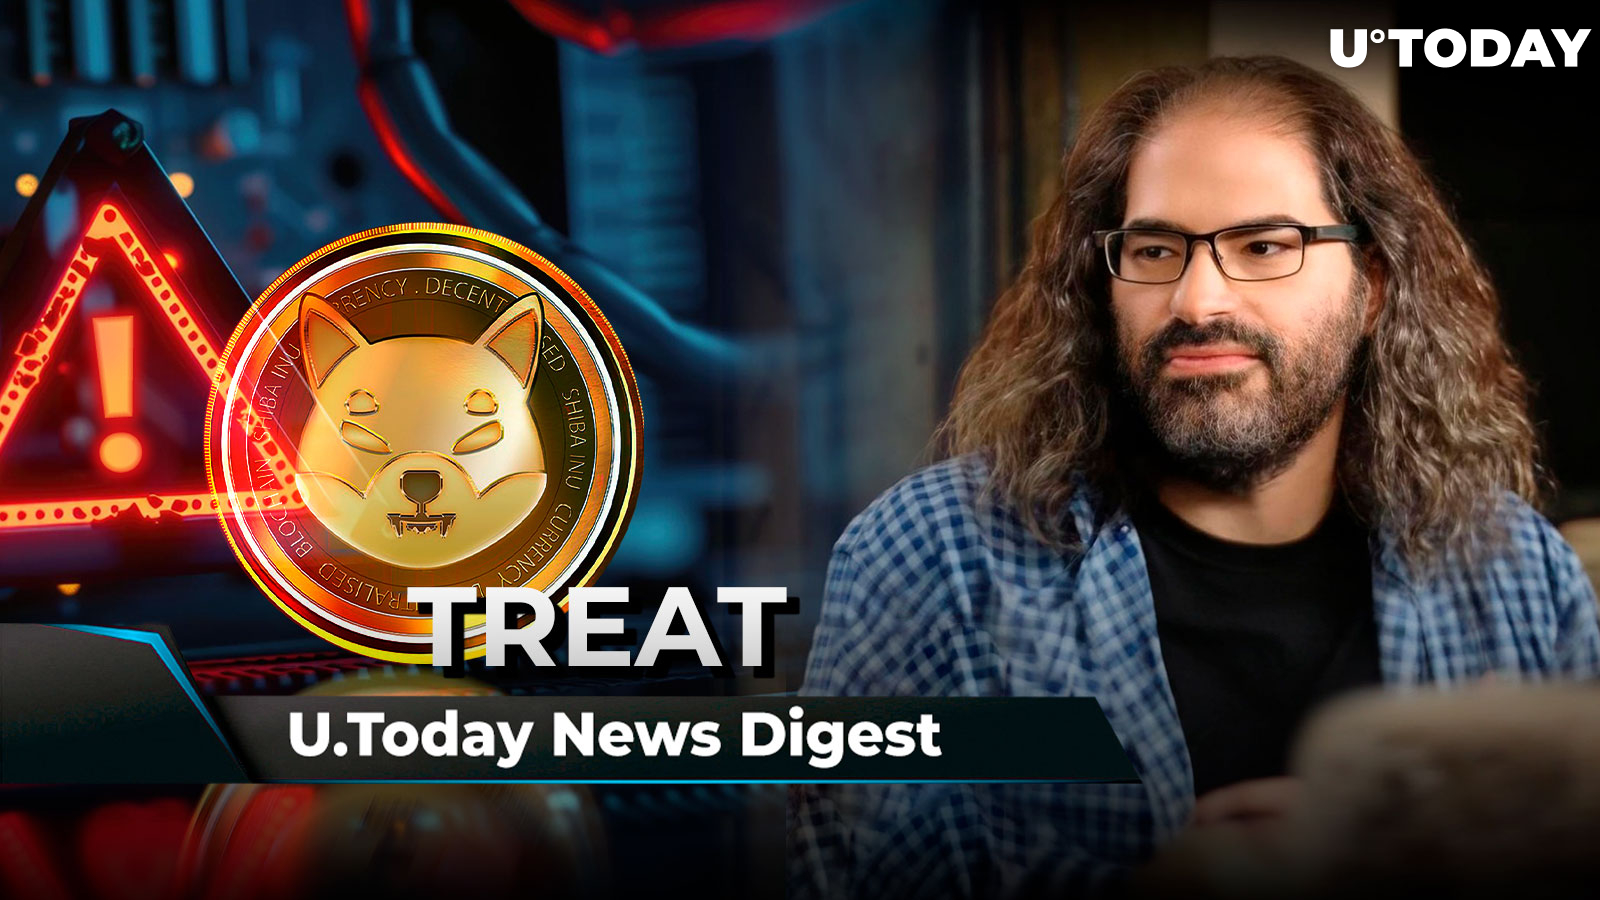 SHIB Insider Issues Crucial TREAT Warning, Ripple CTO Sheds Light on Tokenization, Ethereum's Vitalik Buterin Surprises With Dogecoin Message: Crypto News Digest by U.Today